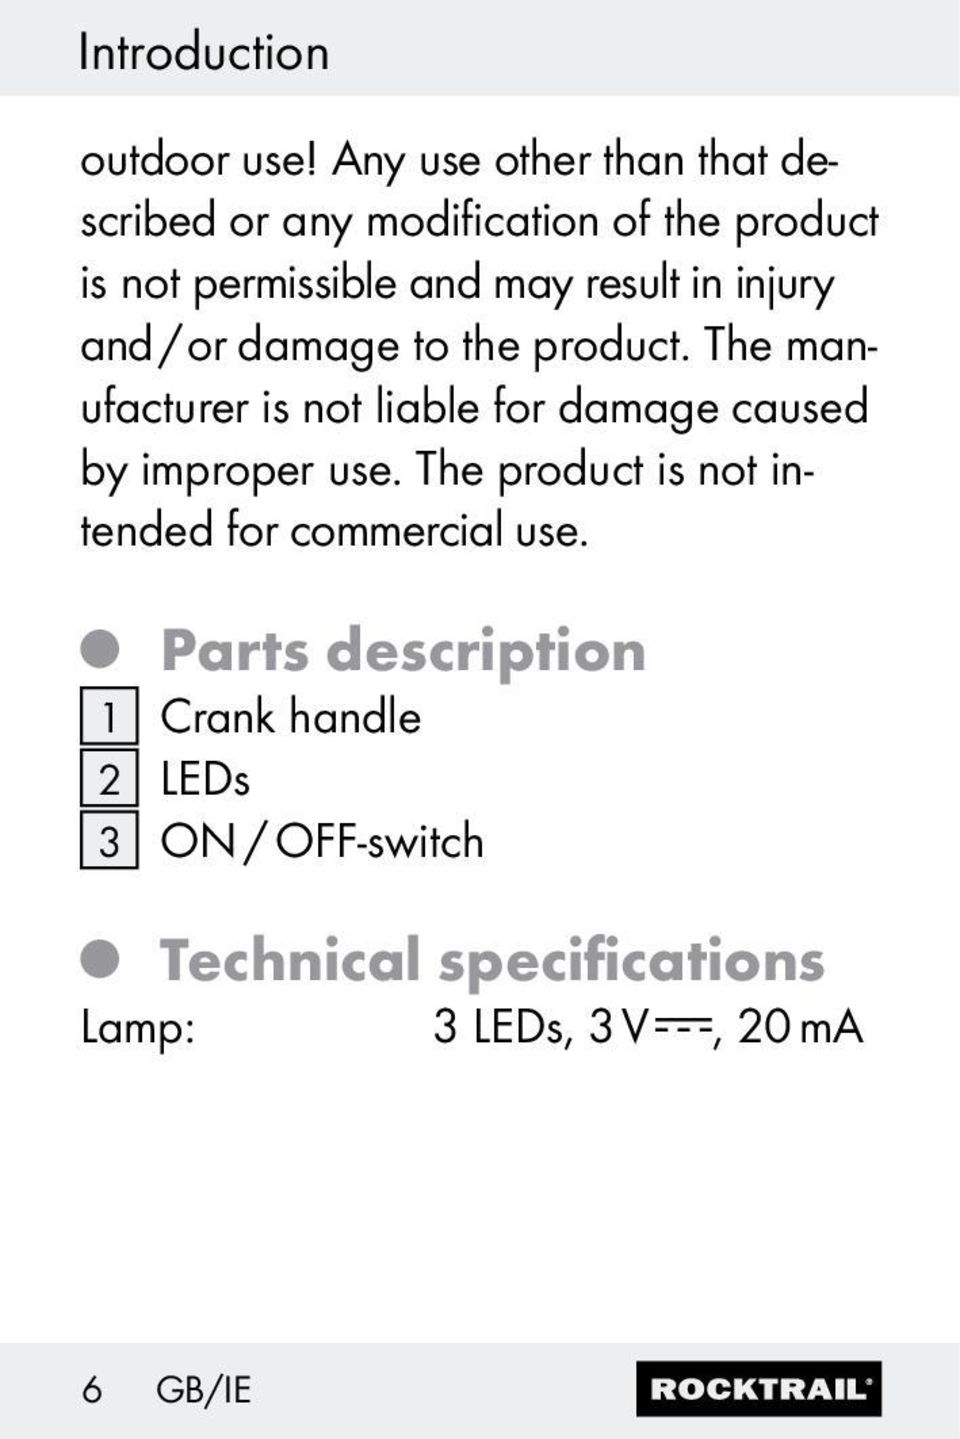 result in injury and / or damage to the product.